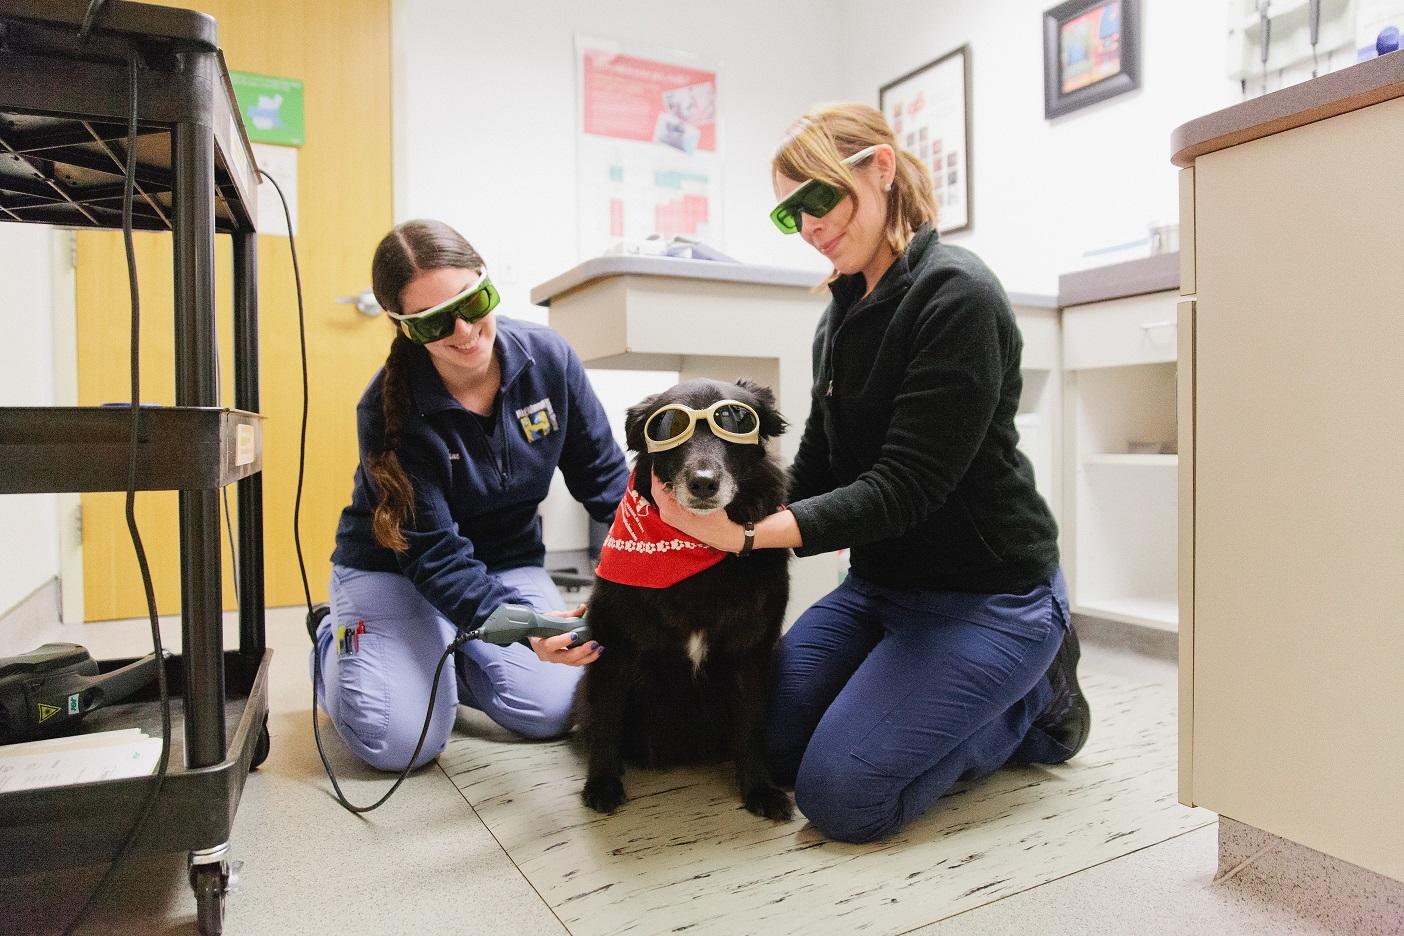 Laser therapy is an advanced therapeutic tool that helps pets heal and provides relief from injuries and a wide range of conditions sooner. Plus, they look adorable wearing protective glasses!